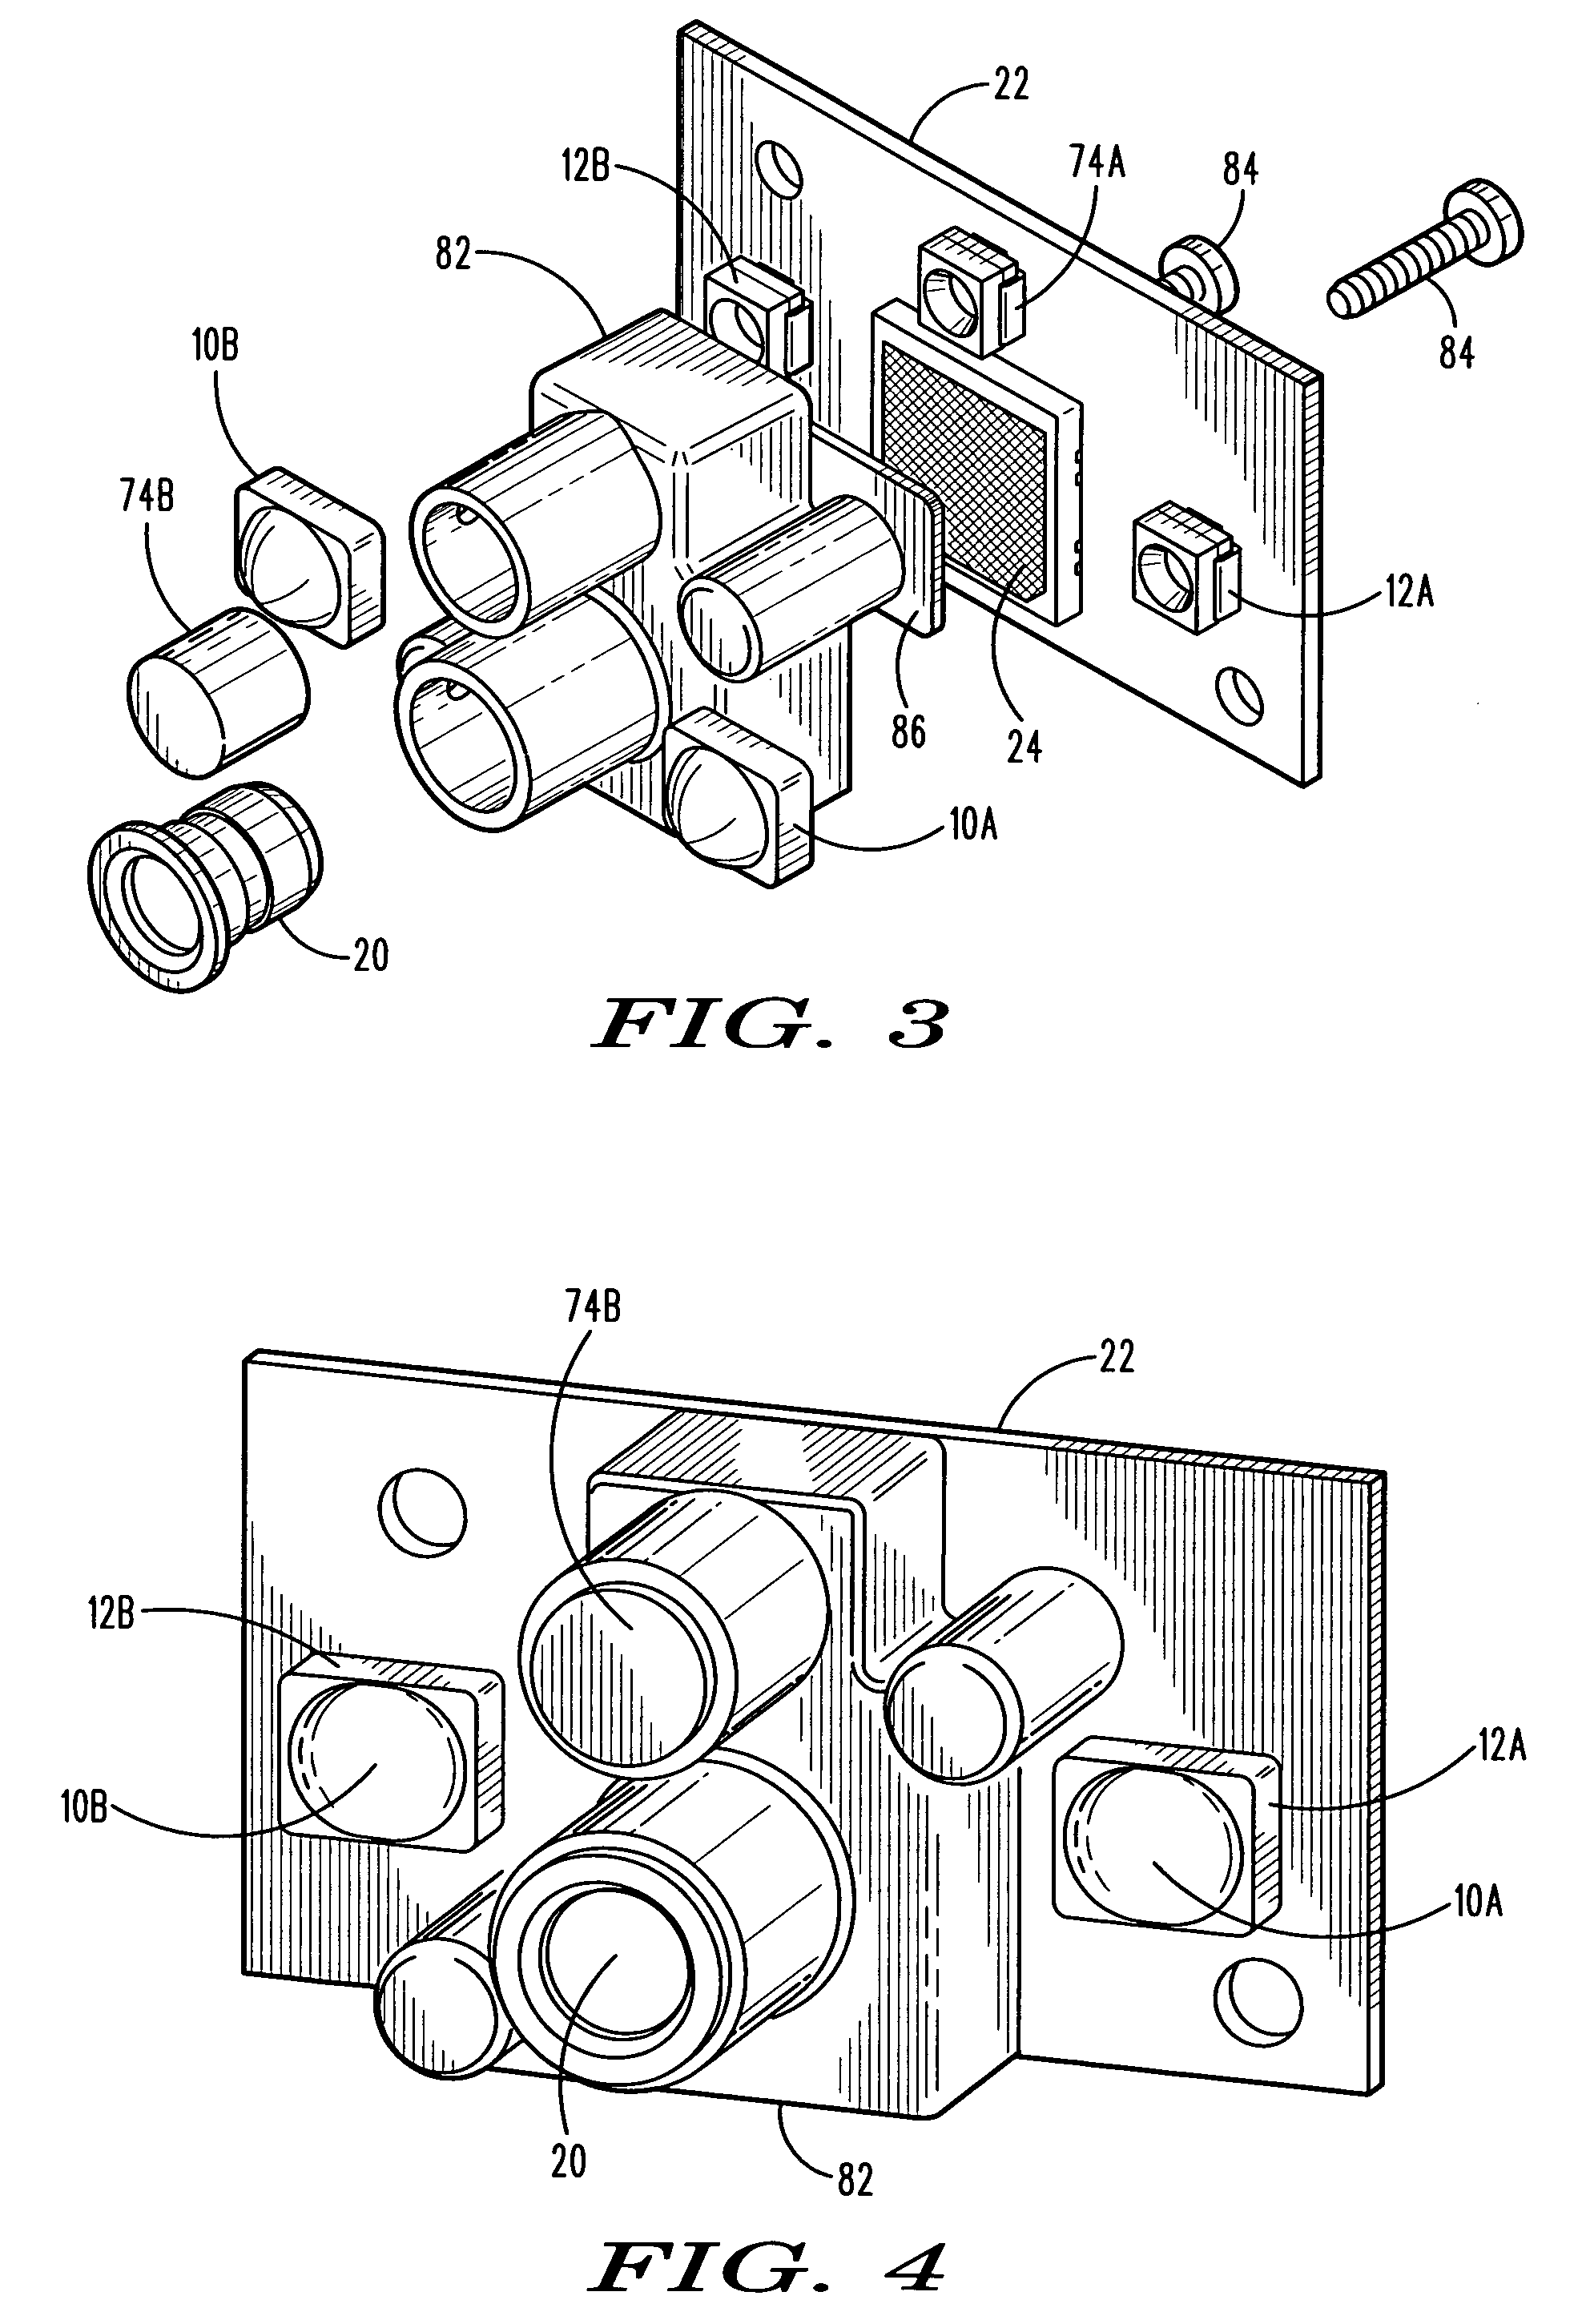 Imaging reader and method with dual function illumination light assembly